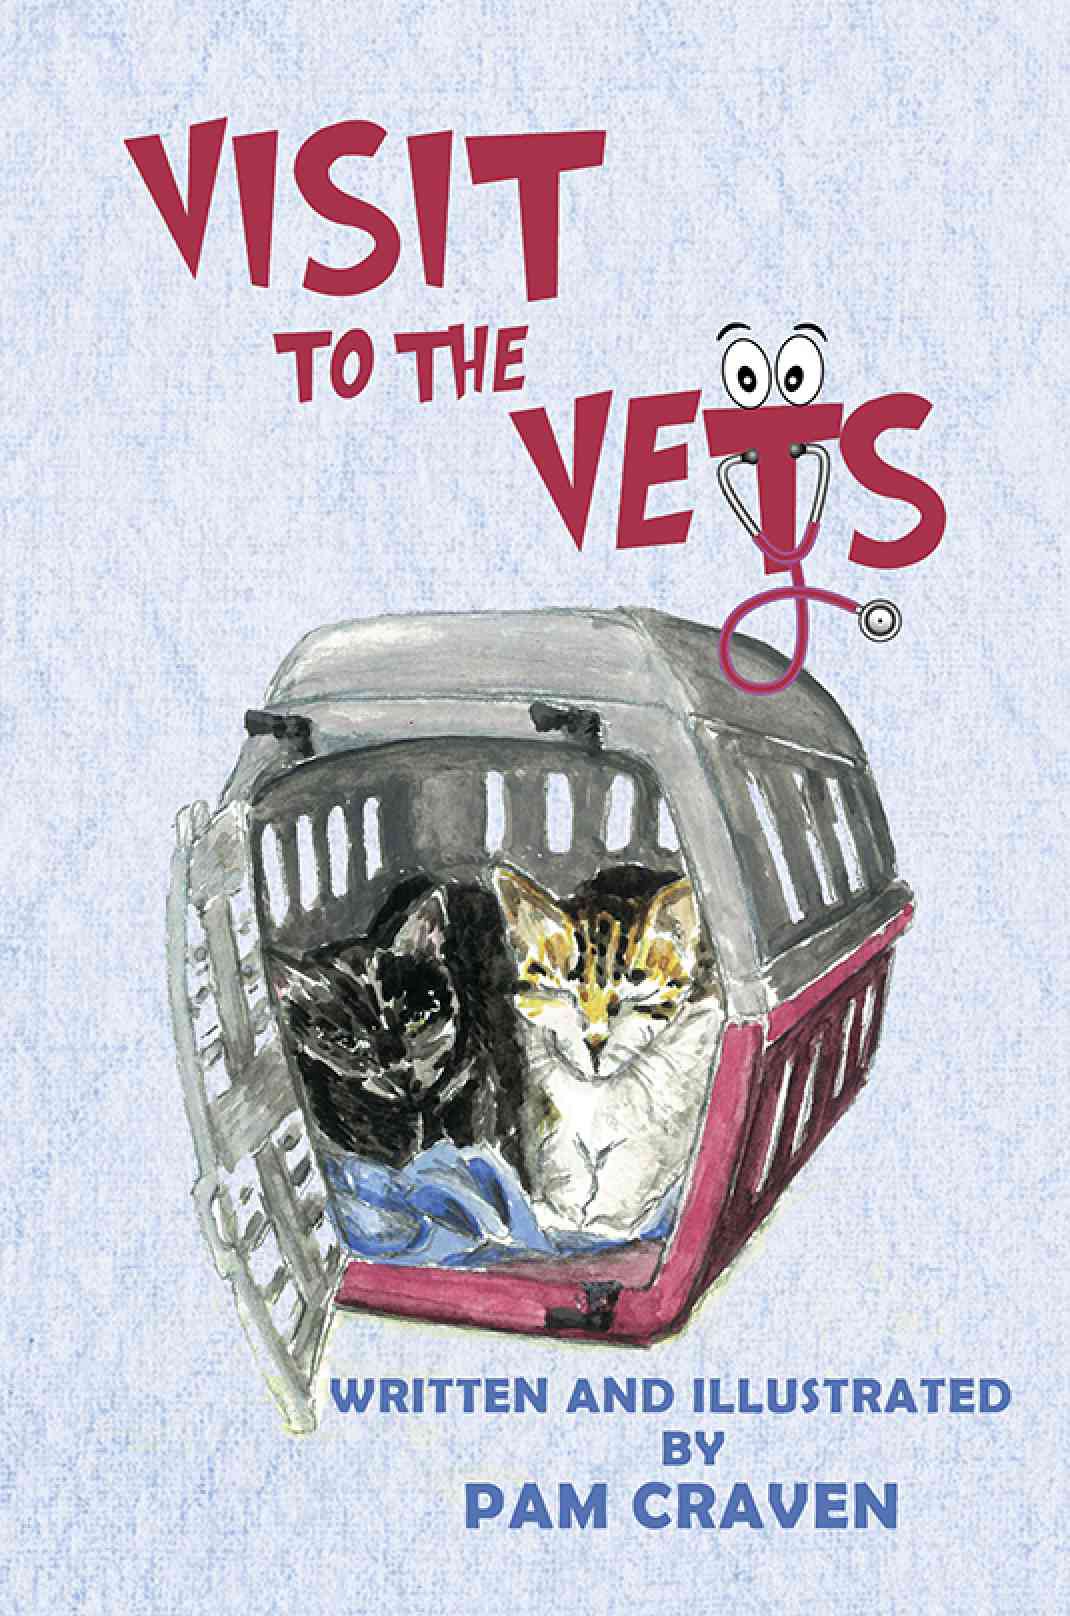 Beautifully sketched ‘Visit To The Vets’ is a Favorite of Kids